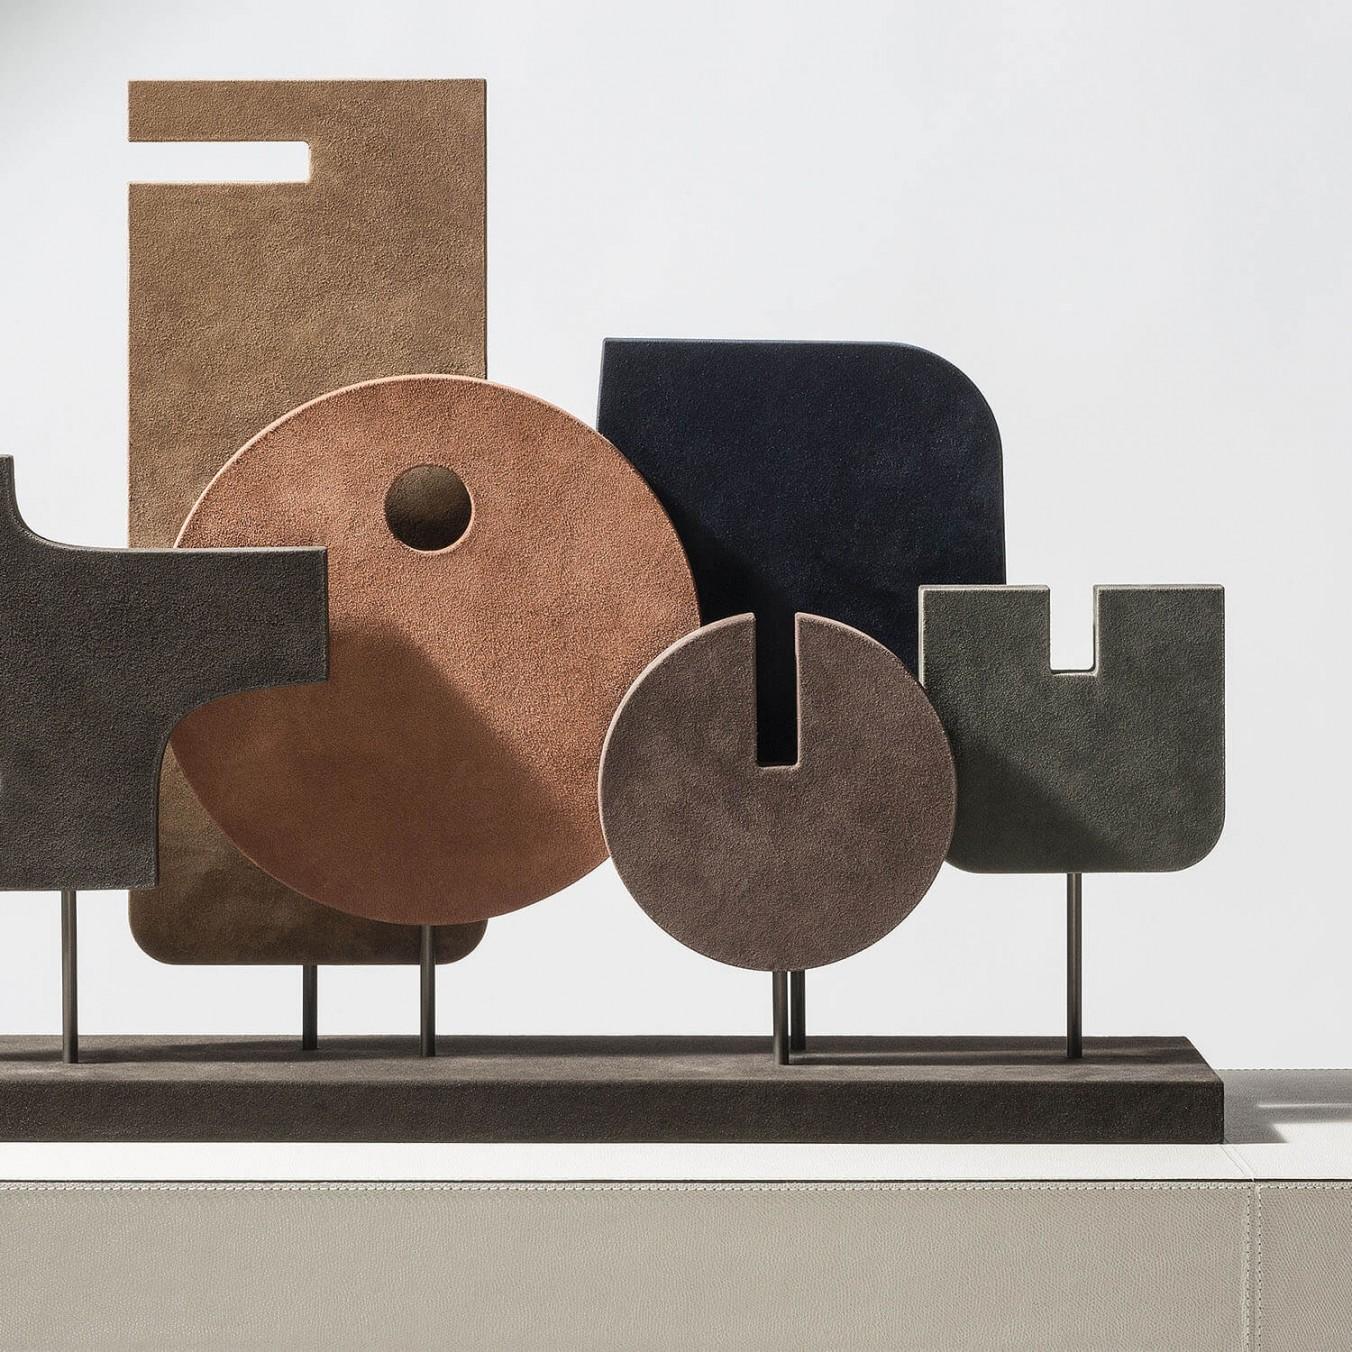 Contemporary suede leather sculpture - Tabou 5 by Stephane Parmentier for Giobagnara.

A mix of space-age design and tribal art, these contemporary totems are great decorative pieces able to create a connection between abstraction and